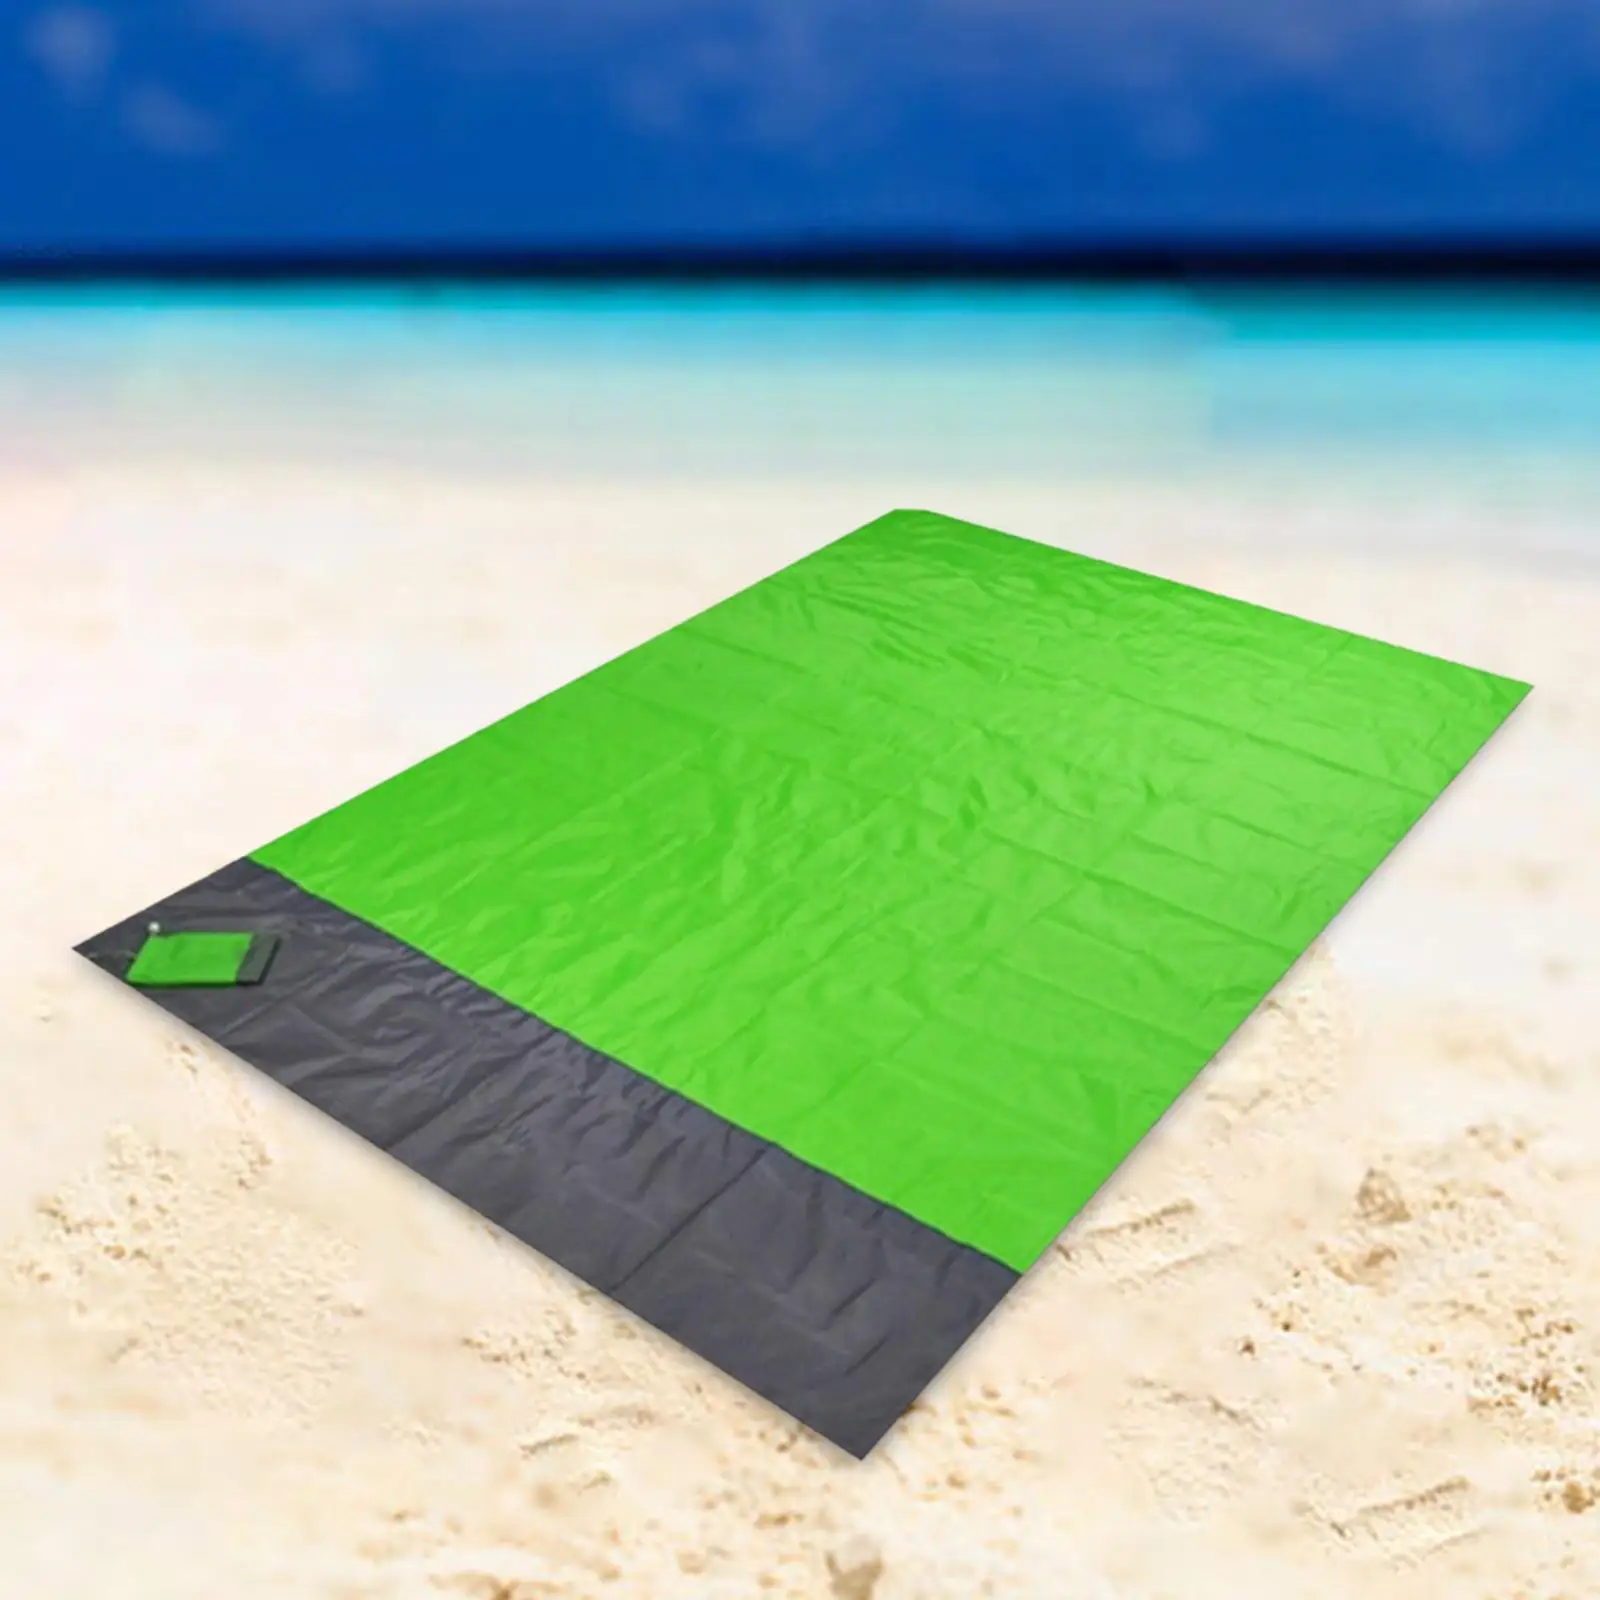 Picnic Blanket Beach Blanket Outdoor Mat Foldable Compact Camping Mat for Sporting Events Travel Camping Backpacking Festival